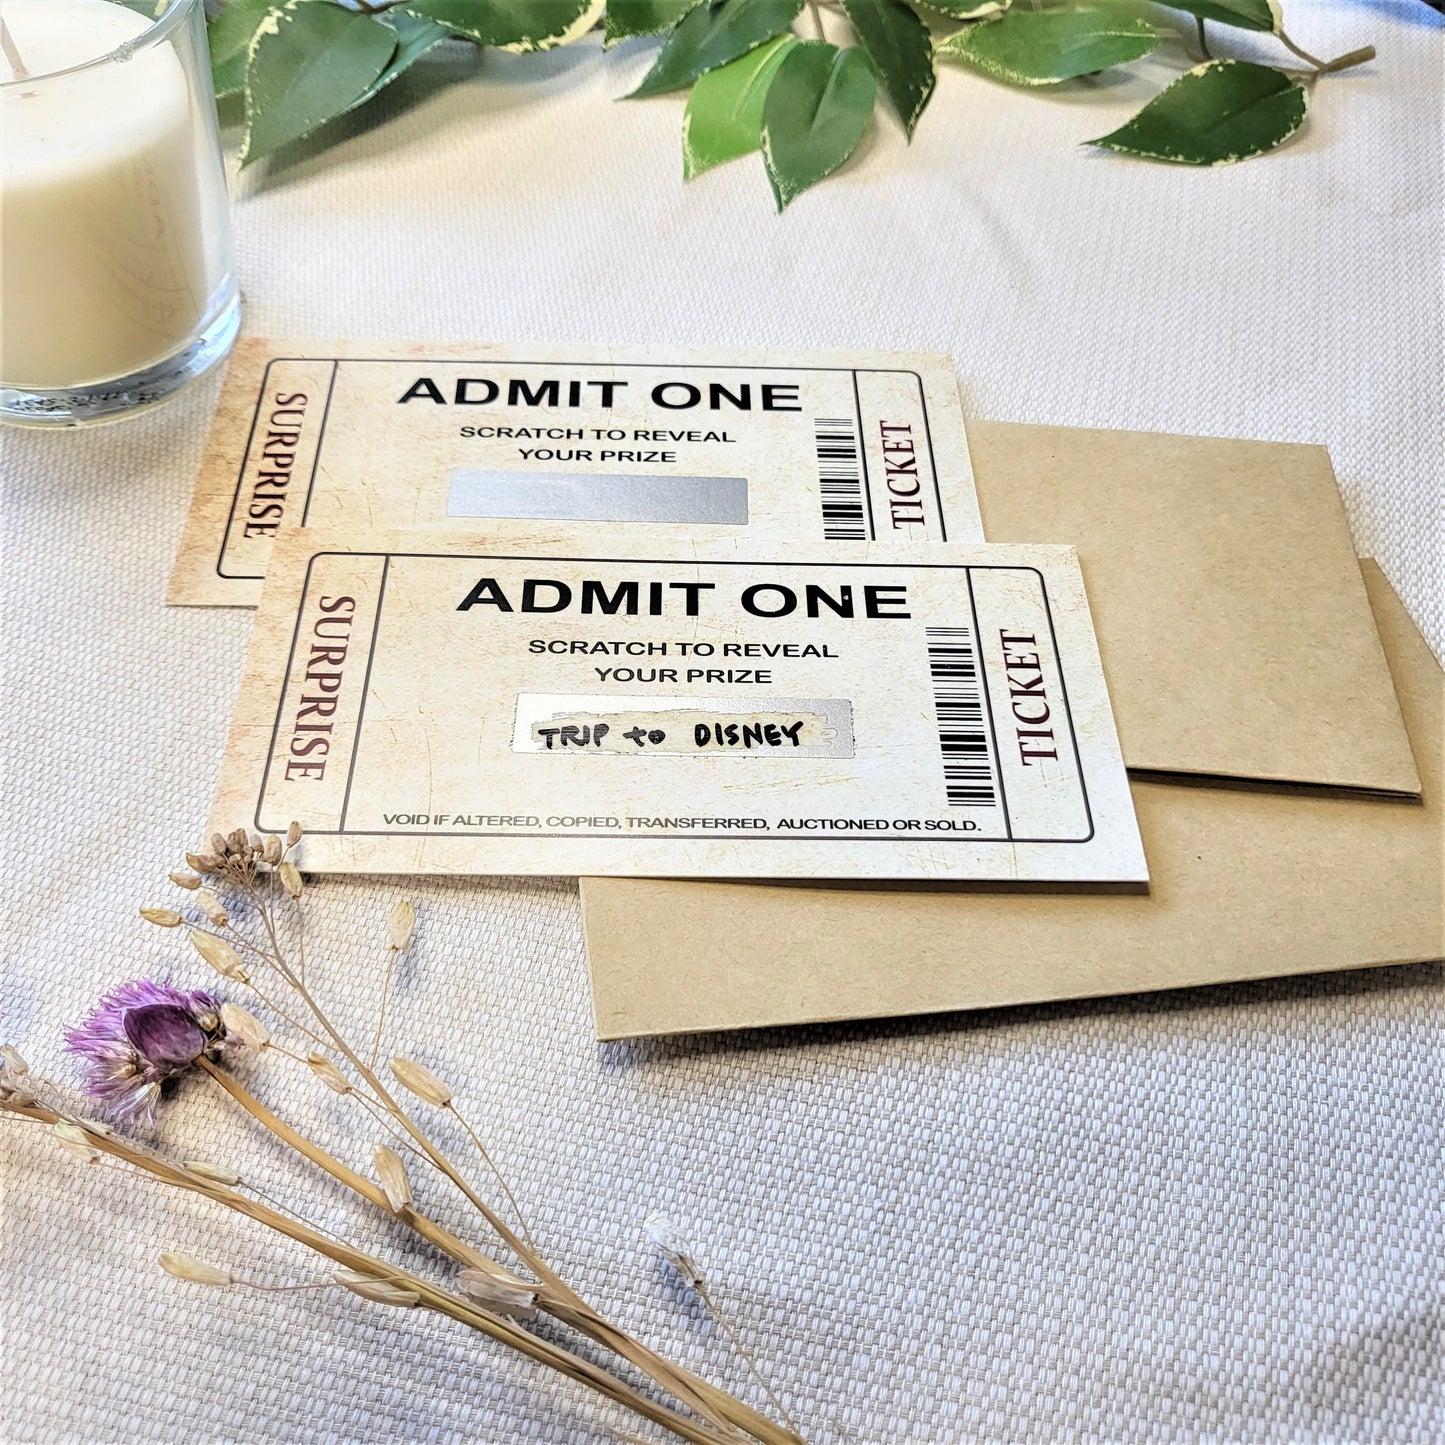 Surprise Reveal Cards, Scratch Reveal Tickets, Custom boarding pass, Surprise Anniversary, Birthday, Scratch off tickets - Set of 2